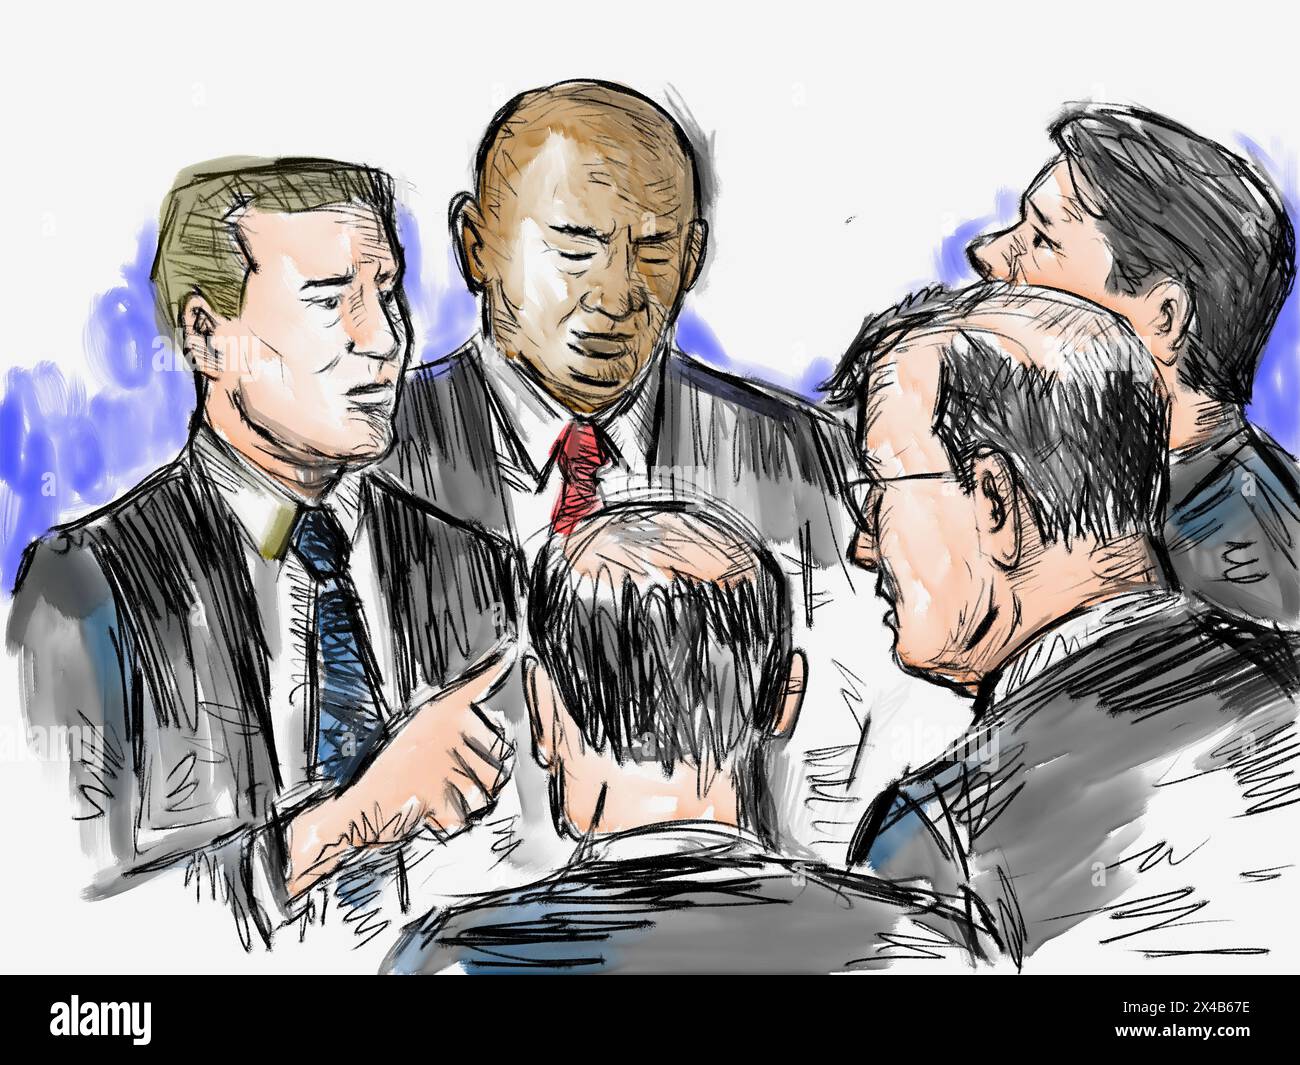 Pastel pencil pen and ink sketch illustration of a courtroom trial setting with lawyer and defendant, plaintiff or witness deliberating a court case h Stock Photo